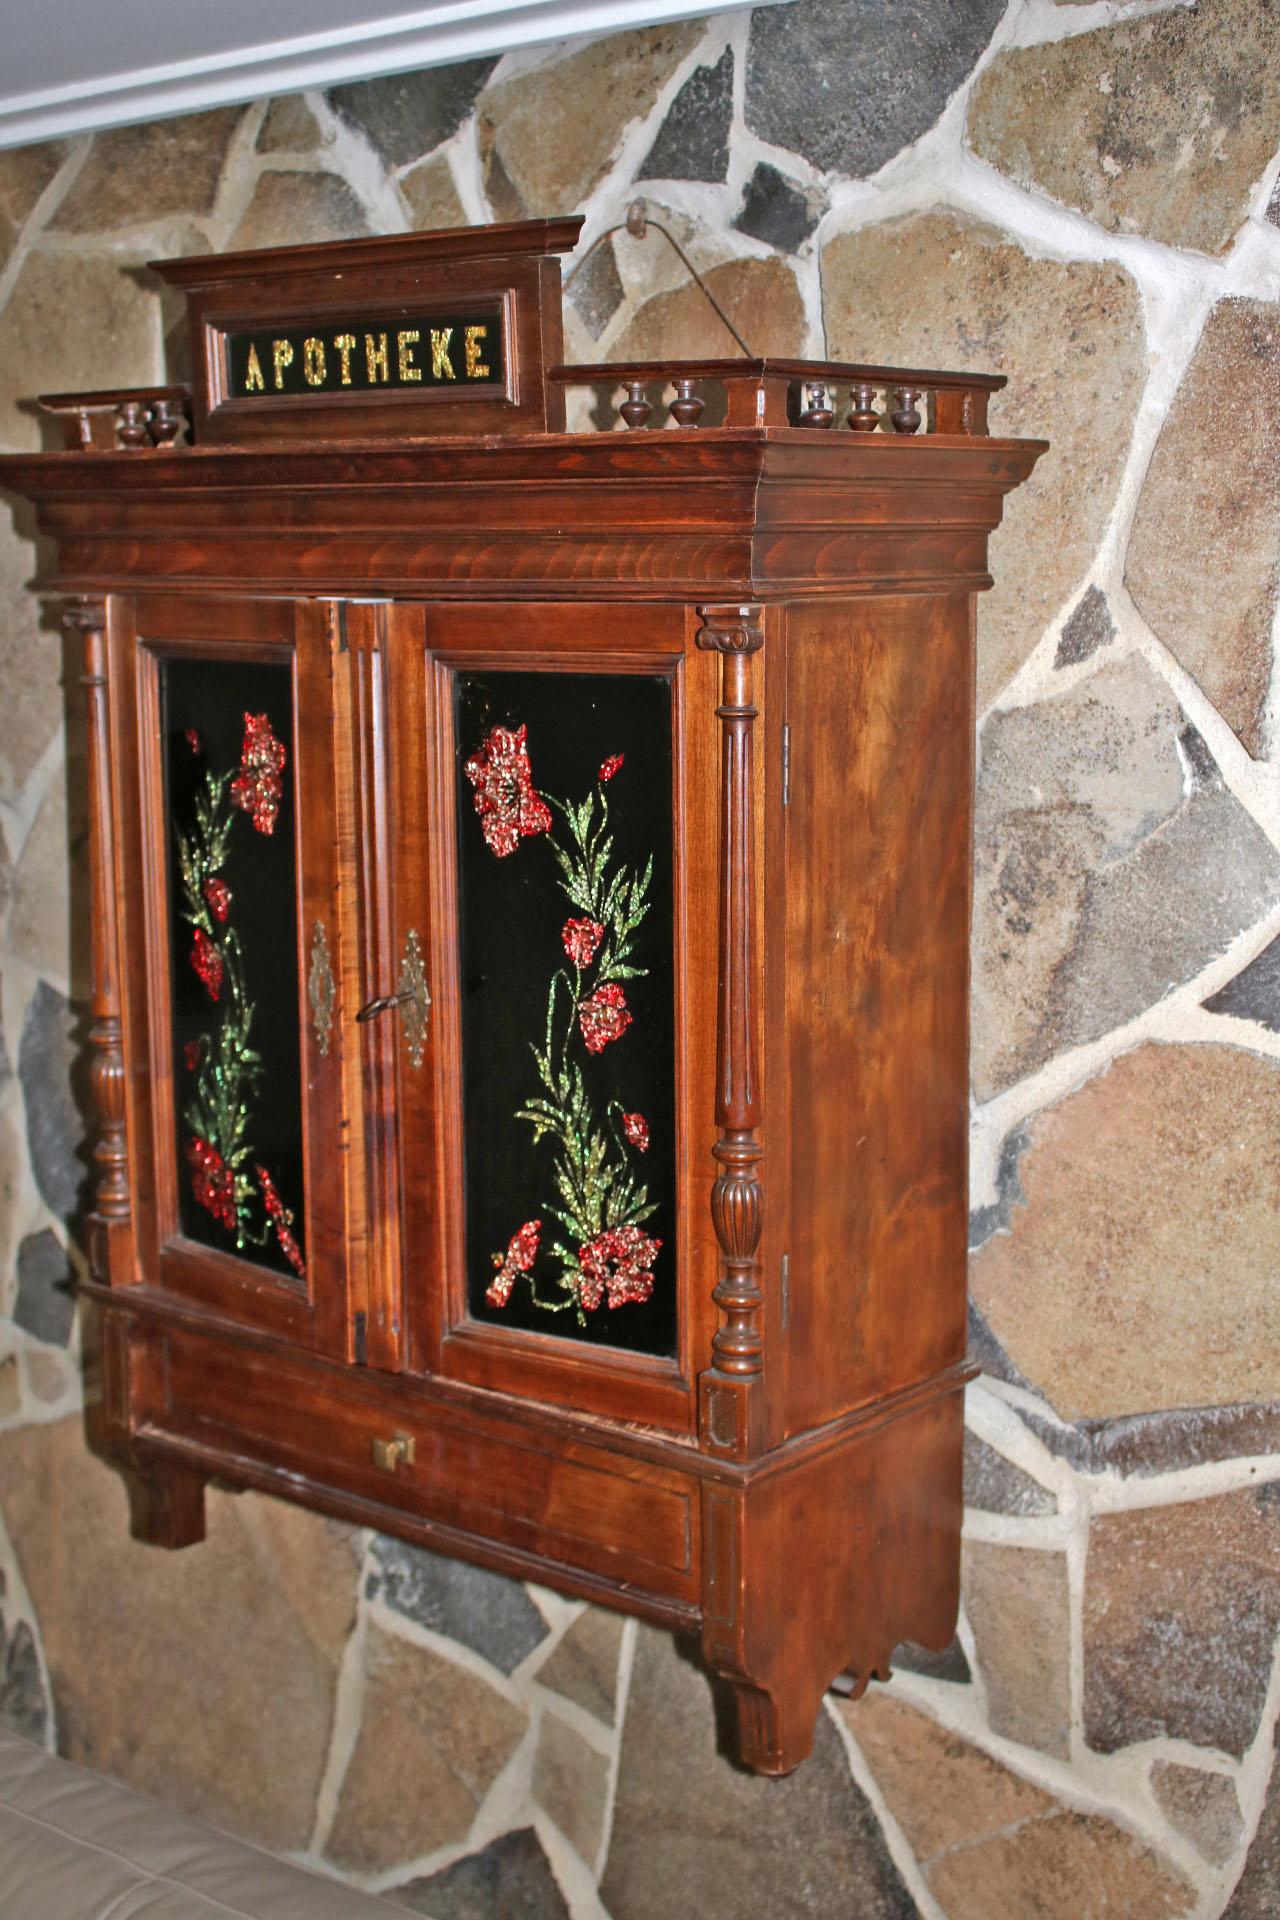 This is a beautiful Late Victorian apothecary cabinet. The letters are beautifully crafted from a gold hued foil, the flowers were crafted with the samew technique, but in green and red. The cabinet is in original condition.